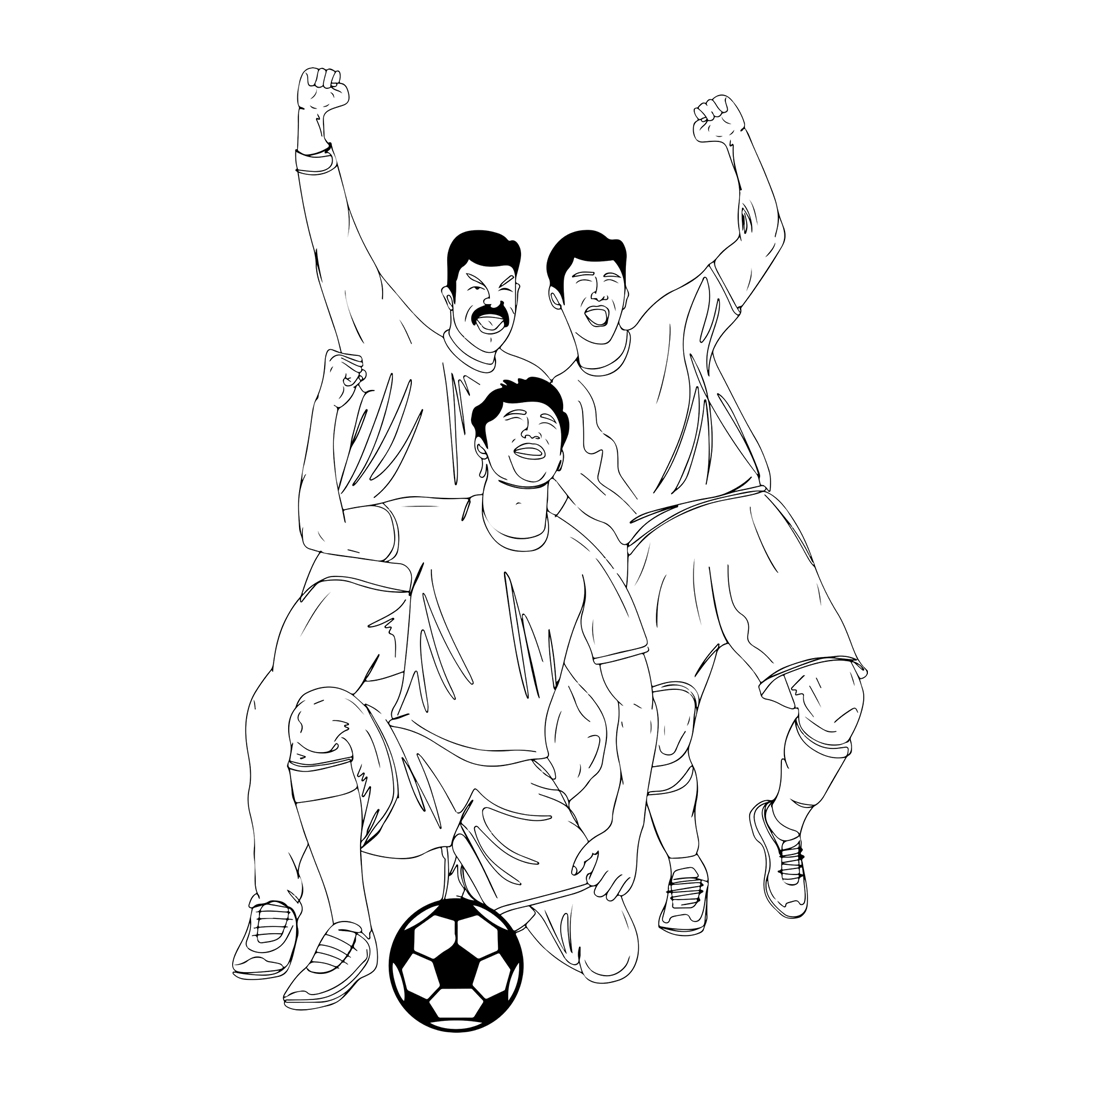 How to Draw a Football - Easy Drawing Tutorial For Kids | Football drawing,  Drawing tutorial easy, Drawing tutorials for kids